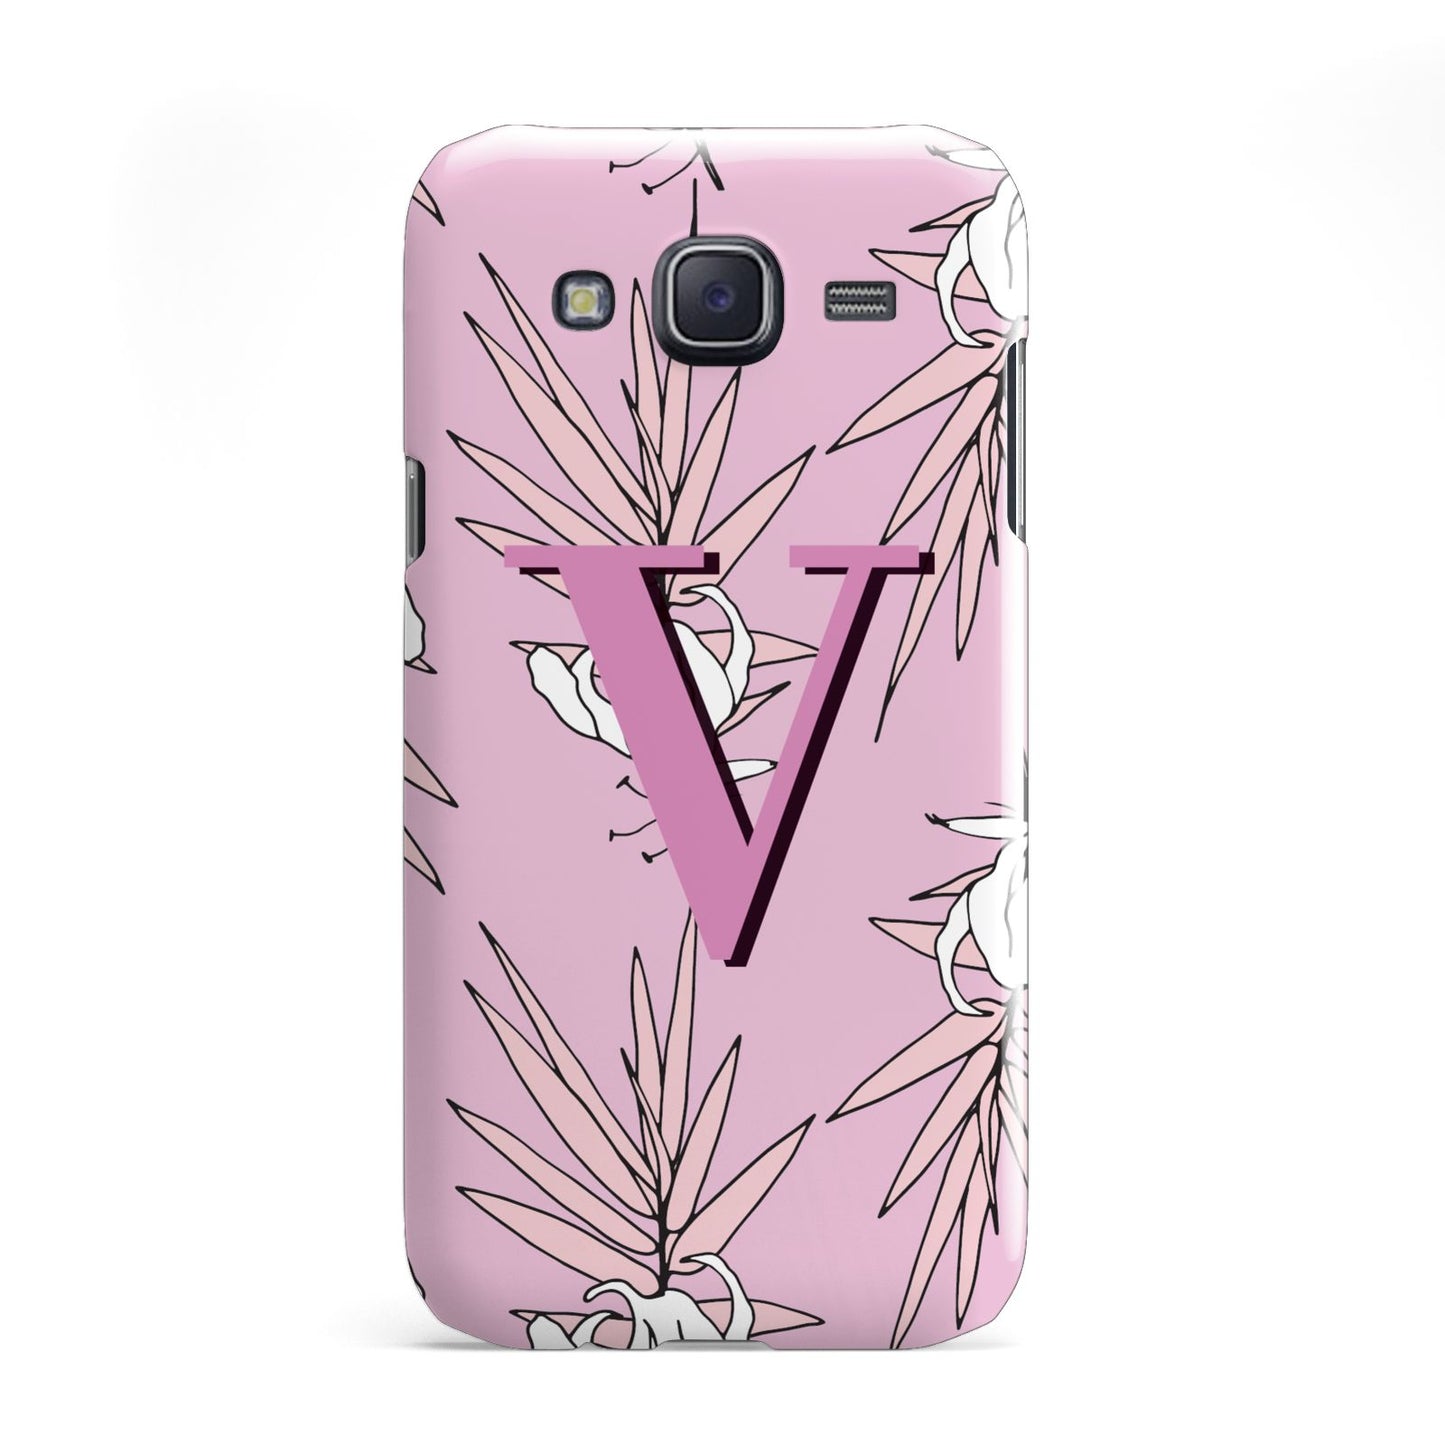 Personalised Pink and White Floral Monogram Samsung Galaxy J5 Case